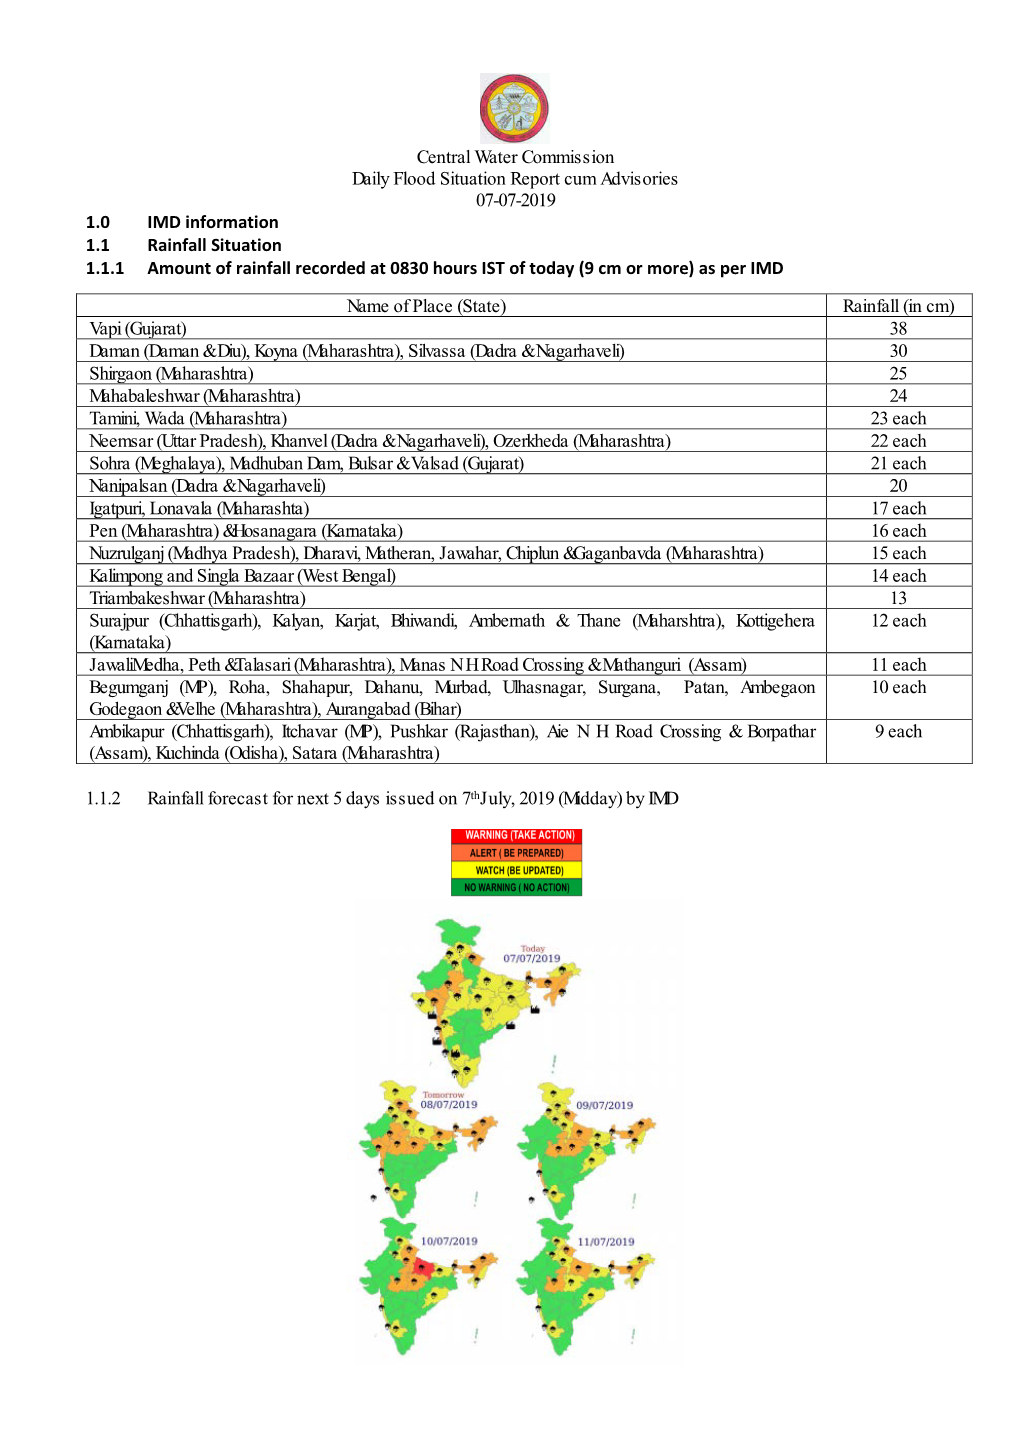 Central Water Commission Daily Flood Situation Report Cum